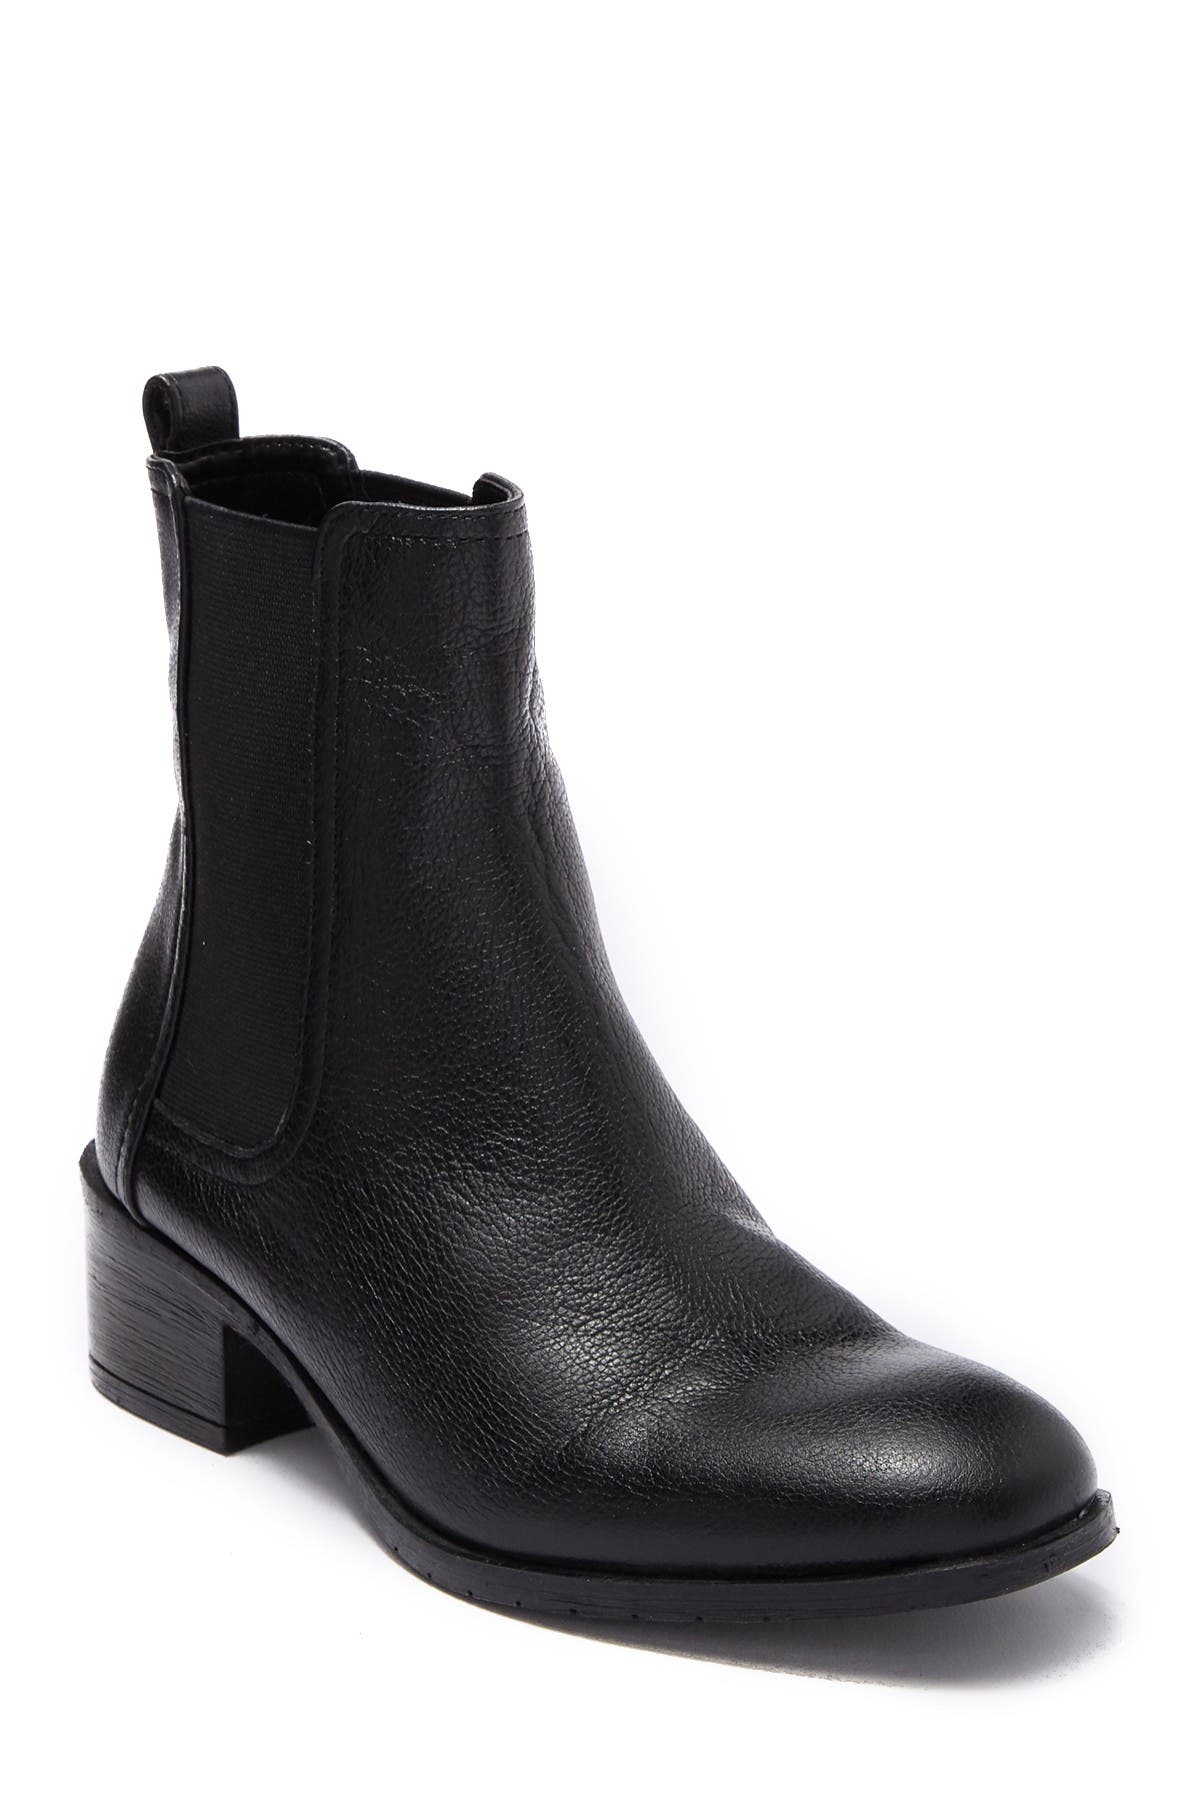 kenneth cole black chelsea boots